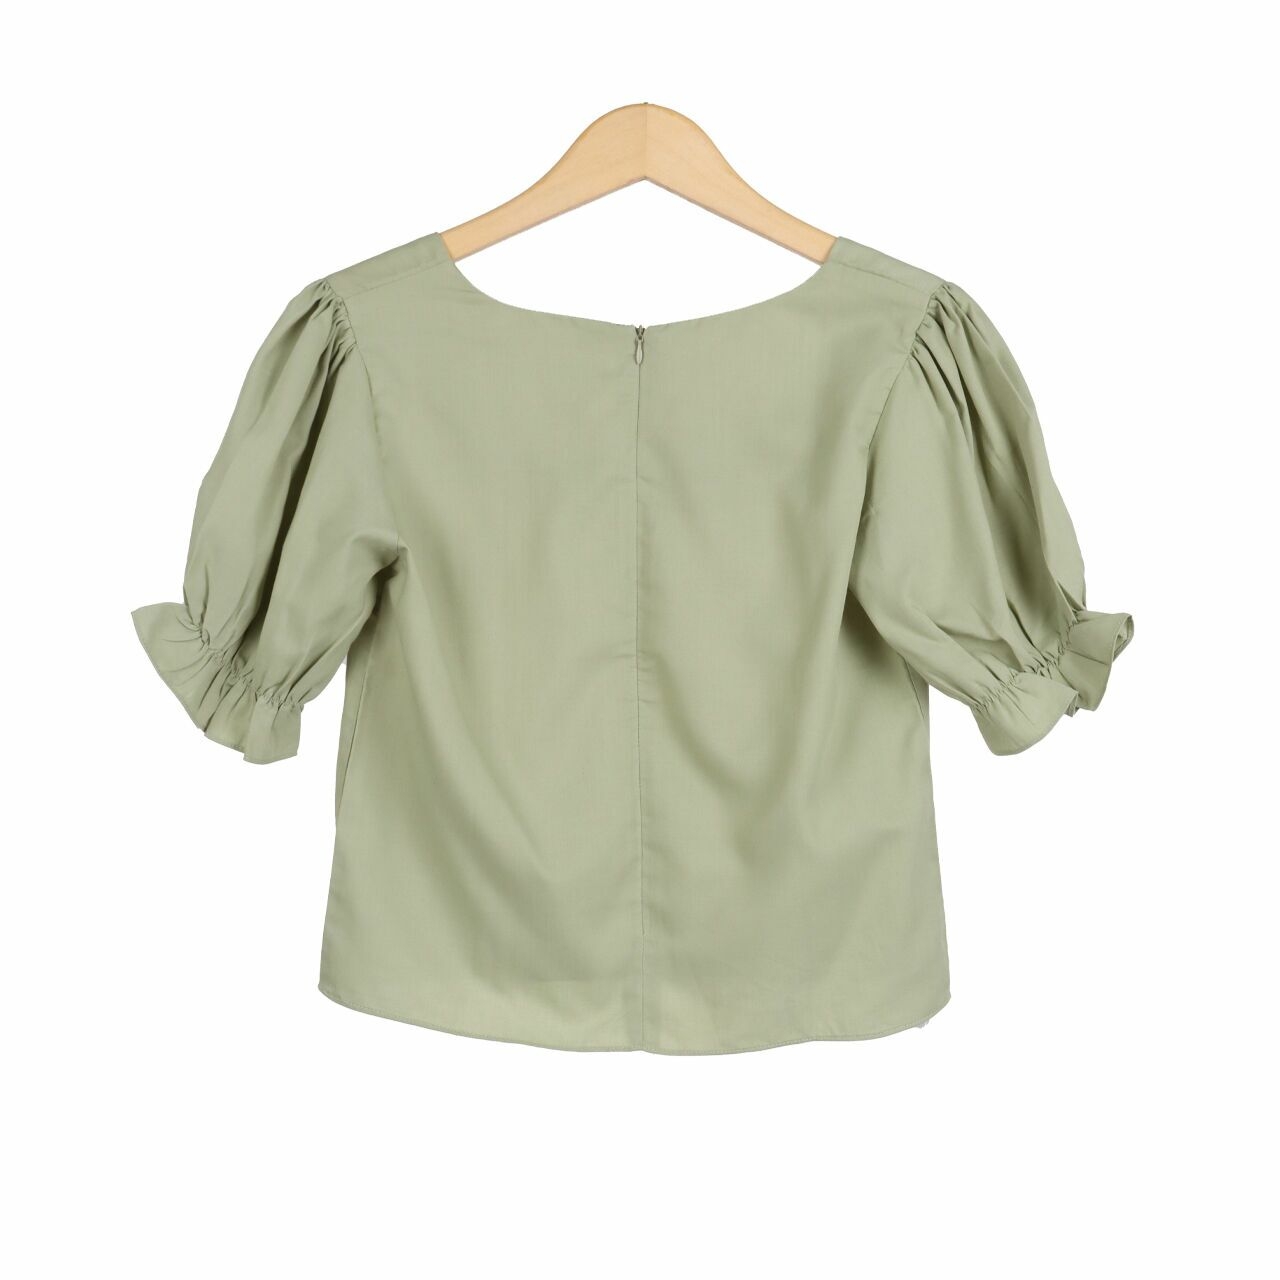 Her Vogue Green Blouse